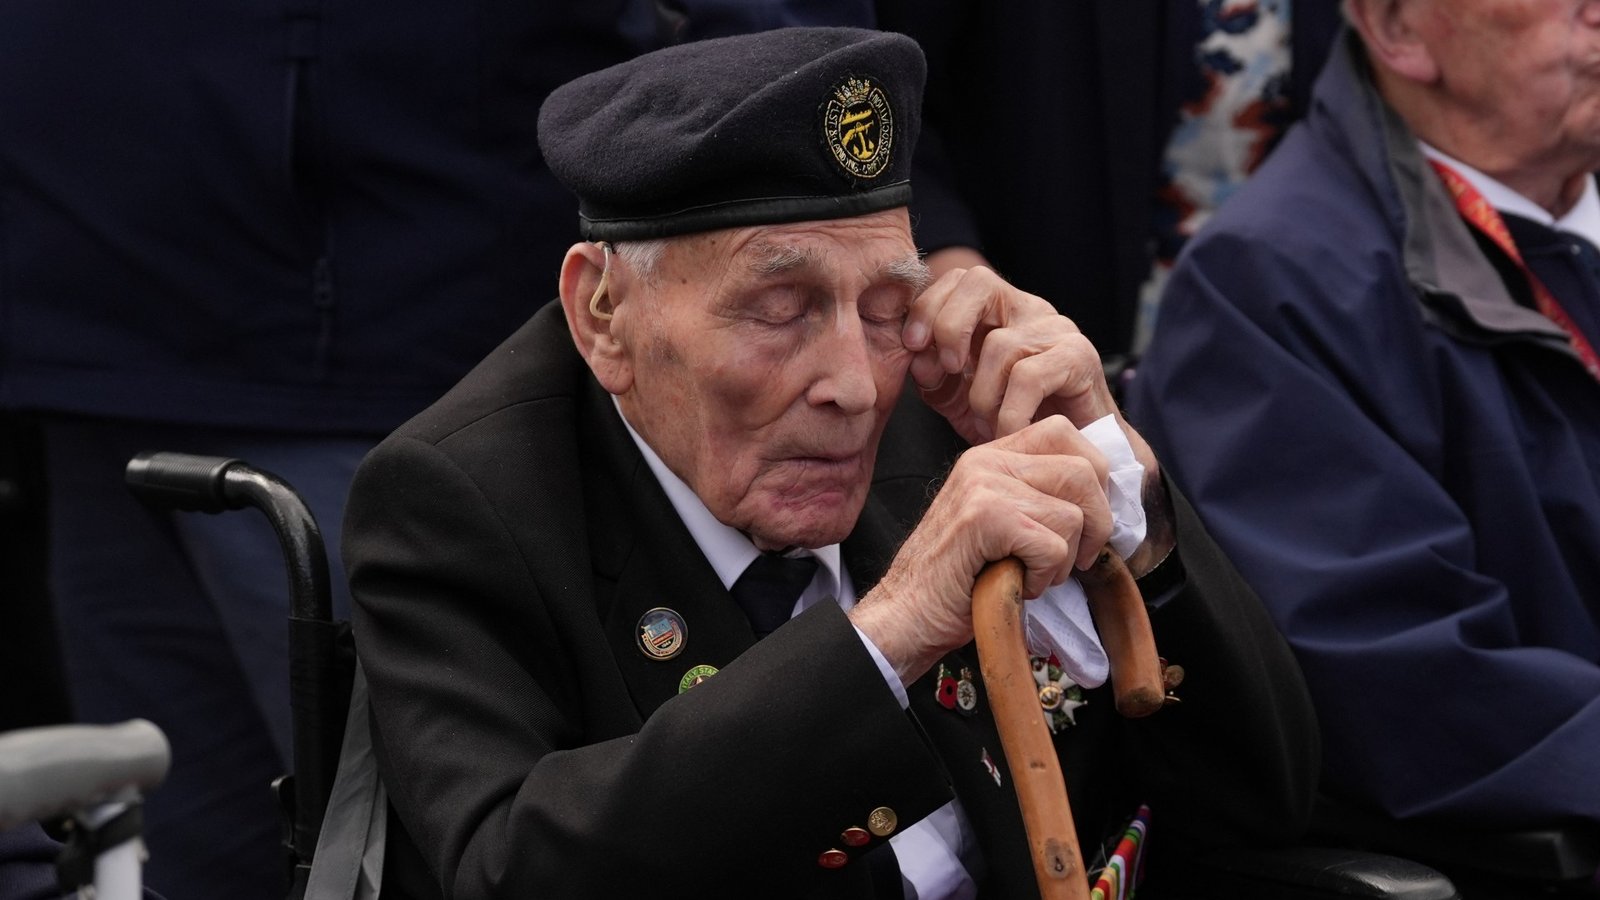 A seven-minute ovation was the least our D-Day legends deserved after saving world from evil